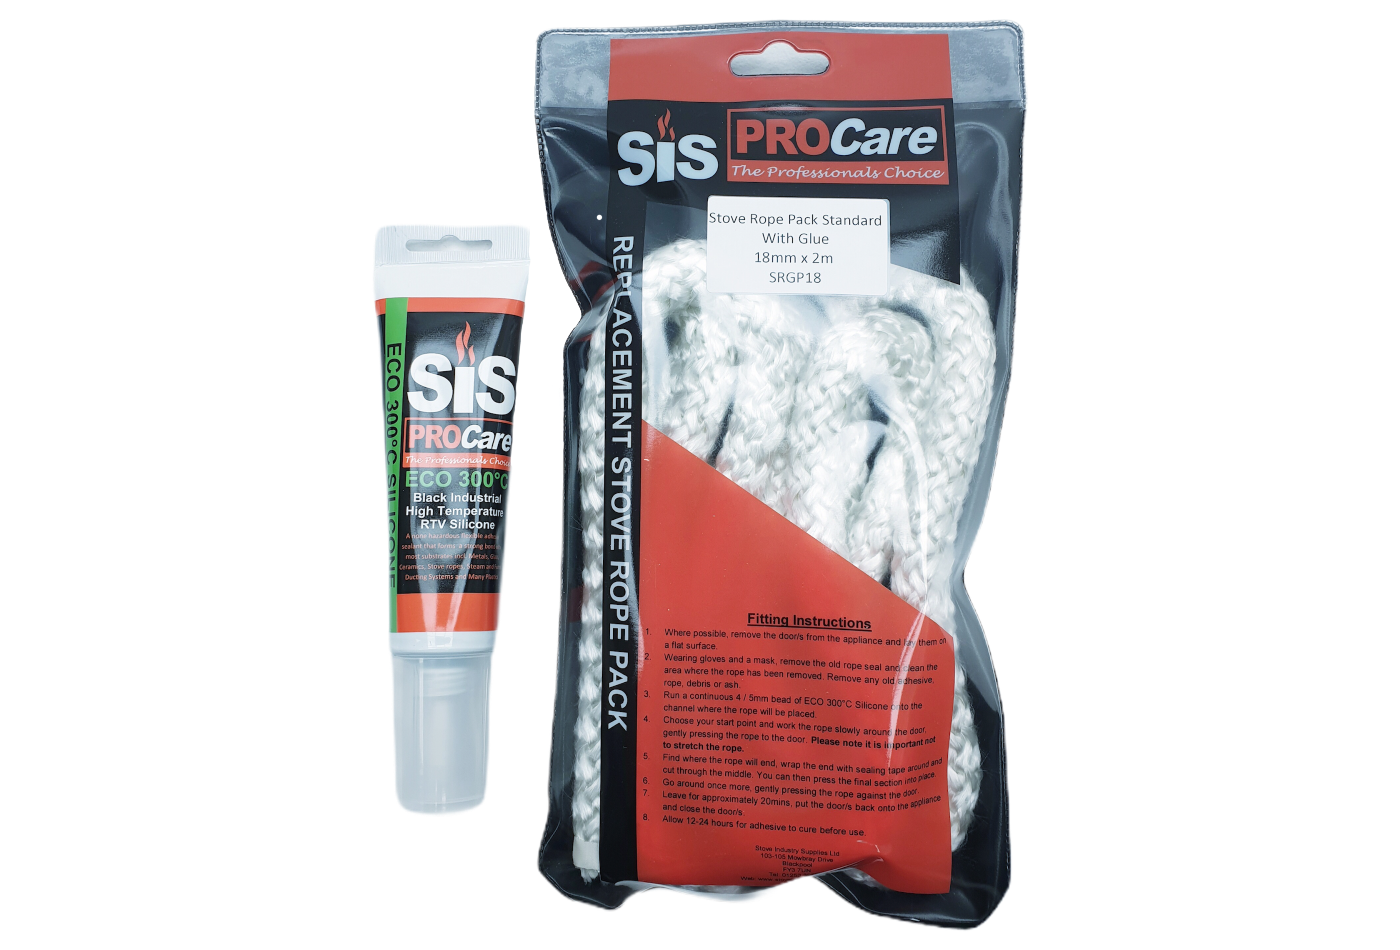 SiS Procare White 18 milimetre x 2 metre Standard Stove Rope & 80 millilitre Rope Glue Pack - product code SRGP18